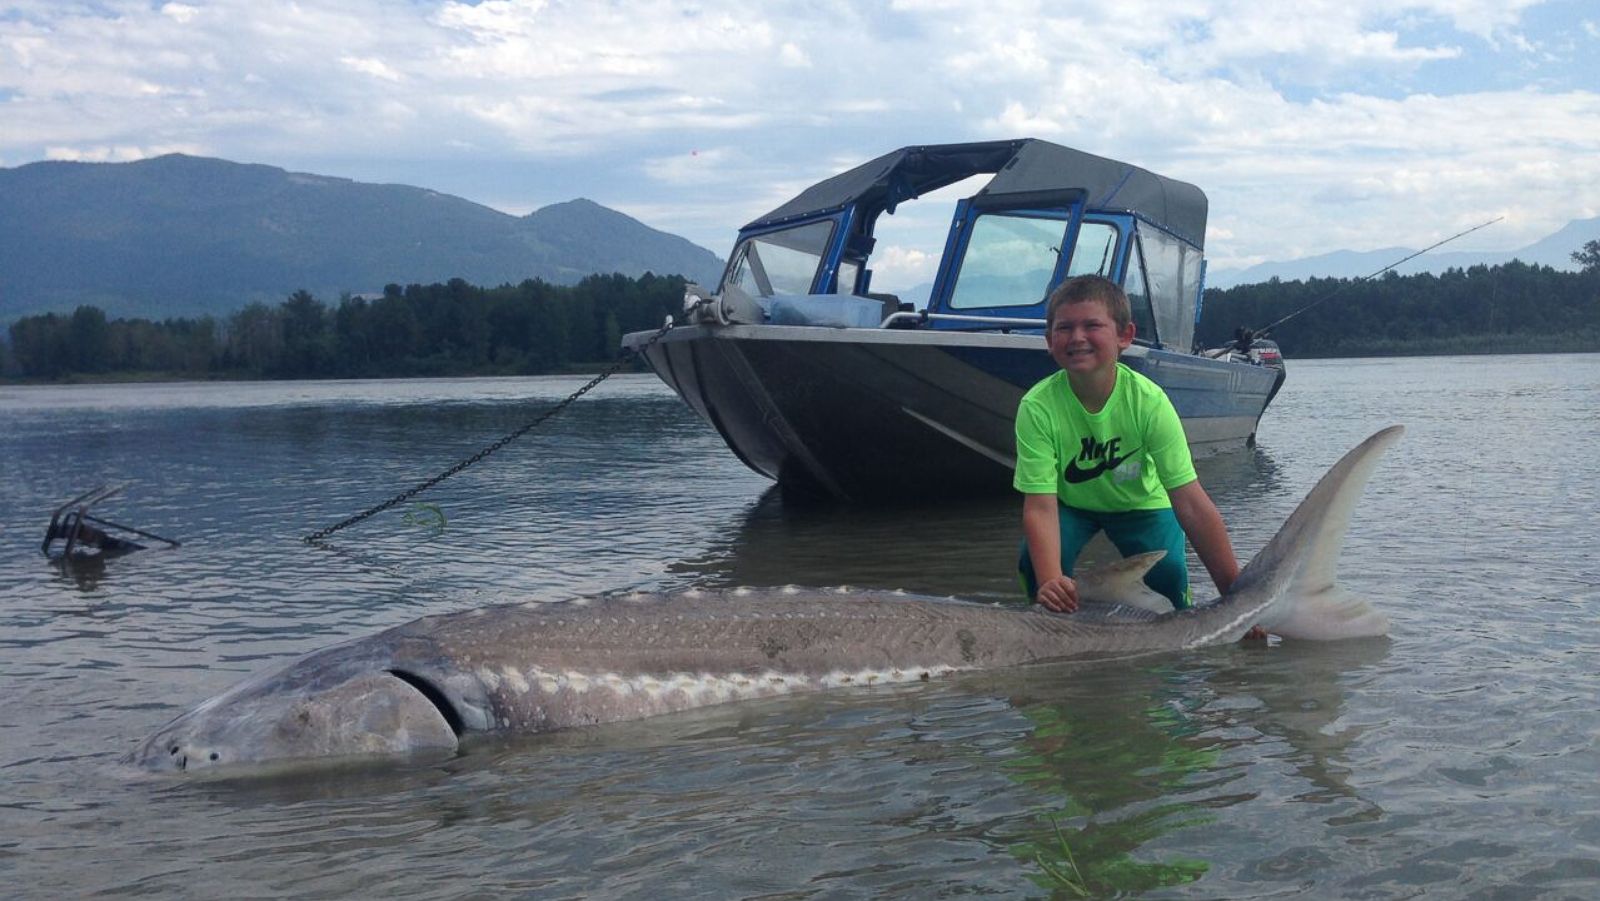 9-Year-Old Boy Reels in 600-Pound Sturgeon and There's Video to